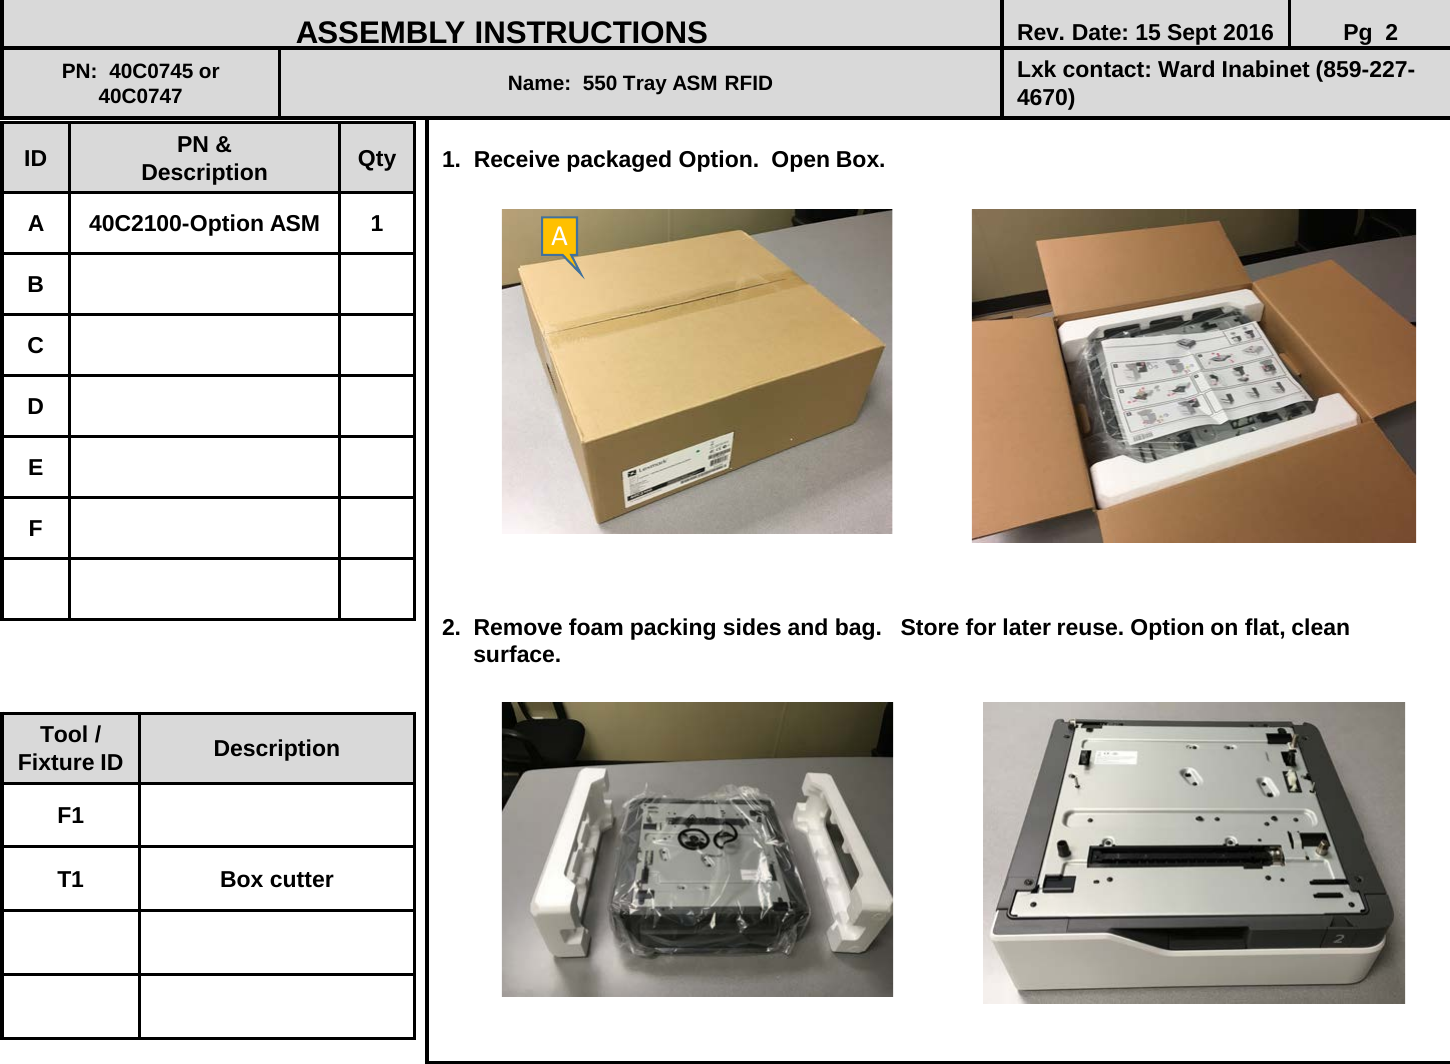  1.  Receive packaged Option.  Open Box.                  2.  Remove foam packing sides and bag.   Store for later reuse. Option on flat, clean         surface.               ID PN &amp; Description Qty A  40C2100-Option ASM  1 B C D E F ASSEMBLY INSTRUCTIONS Rev. Date: 15 Sept 2016 Pg  2 PN:  40C0745 or 40C0747 Name:  550 Tray ASM RFID  Lxk contact: Ward Inabinet (859-227-4670) Tool / Fixture ID Description F1 T1 Box cutter A 